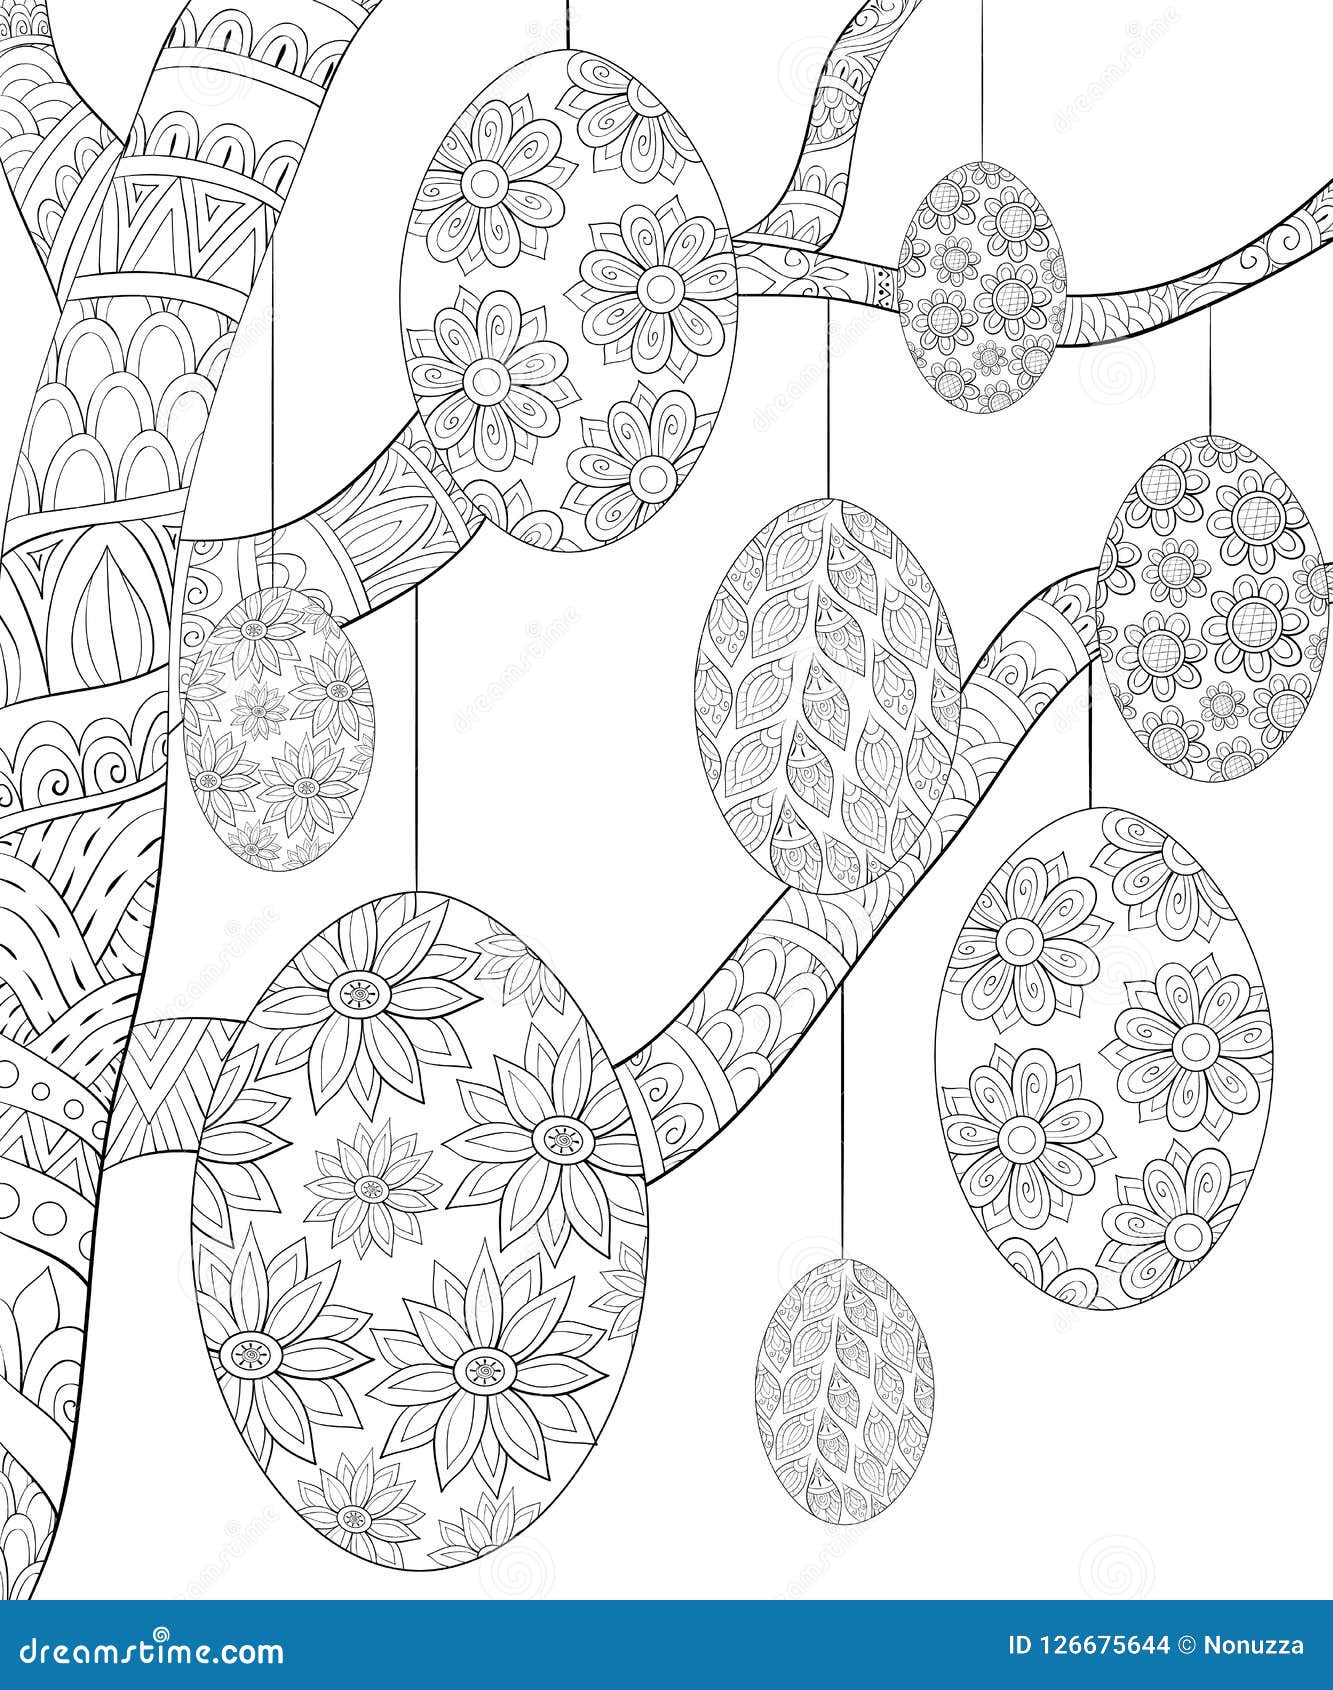 Adult coloring bookpage a tree full of easter eggs for relaxingzen art style illustration stock vector